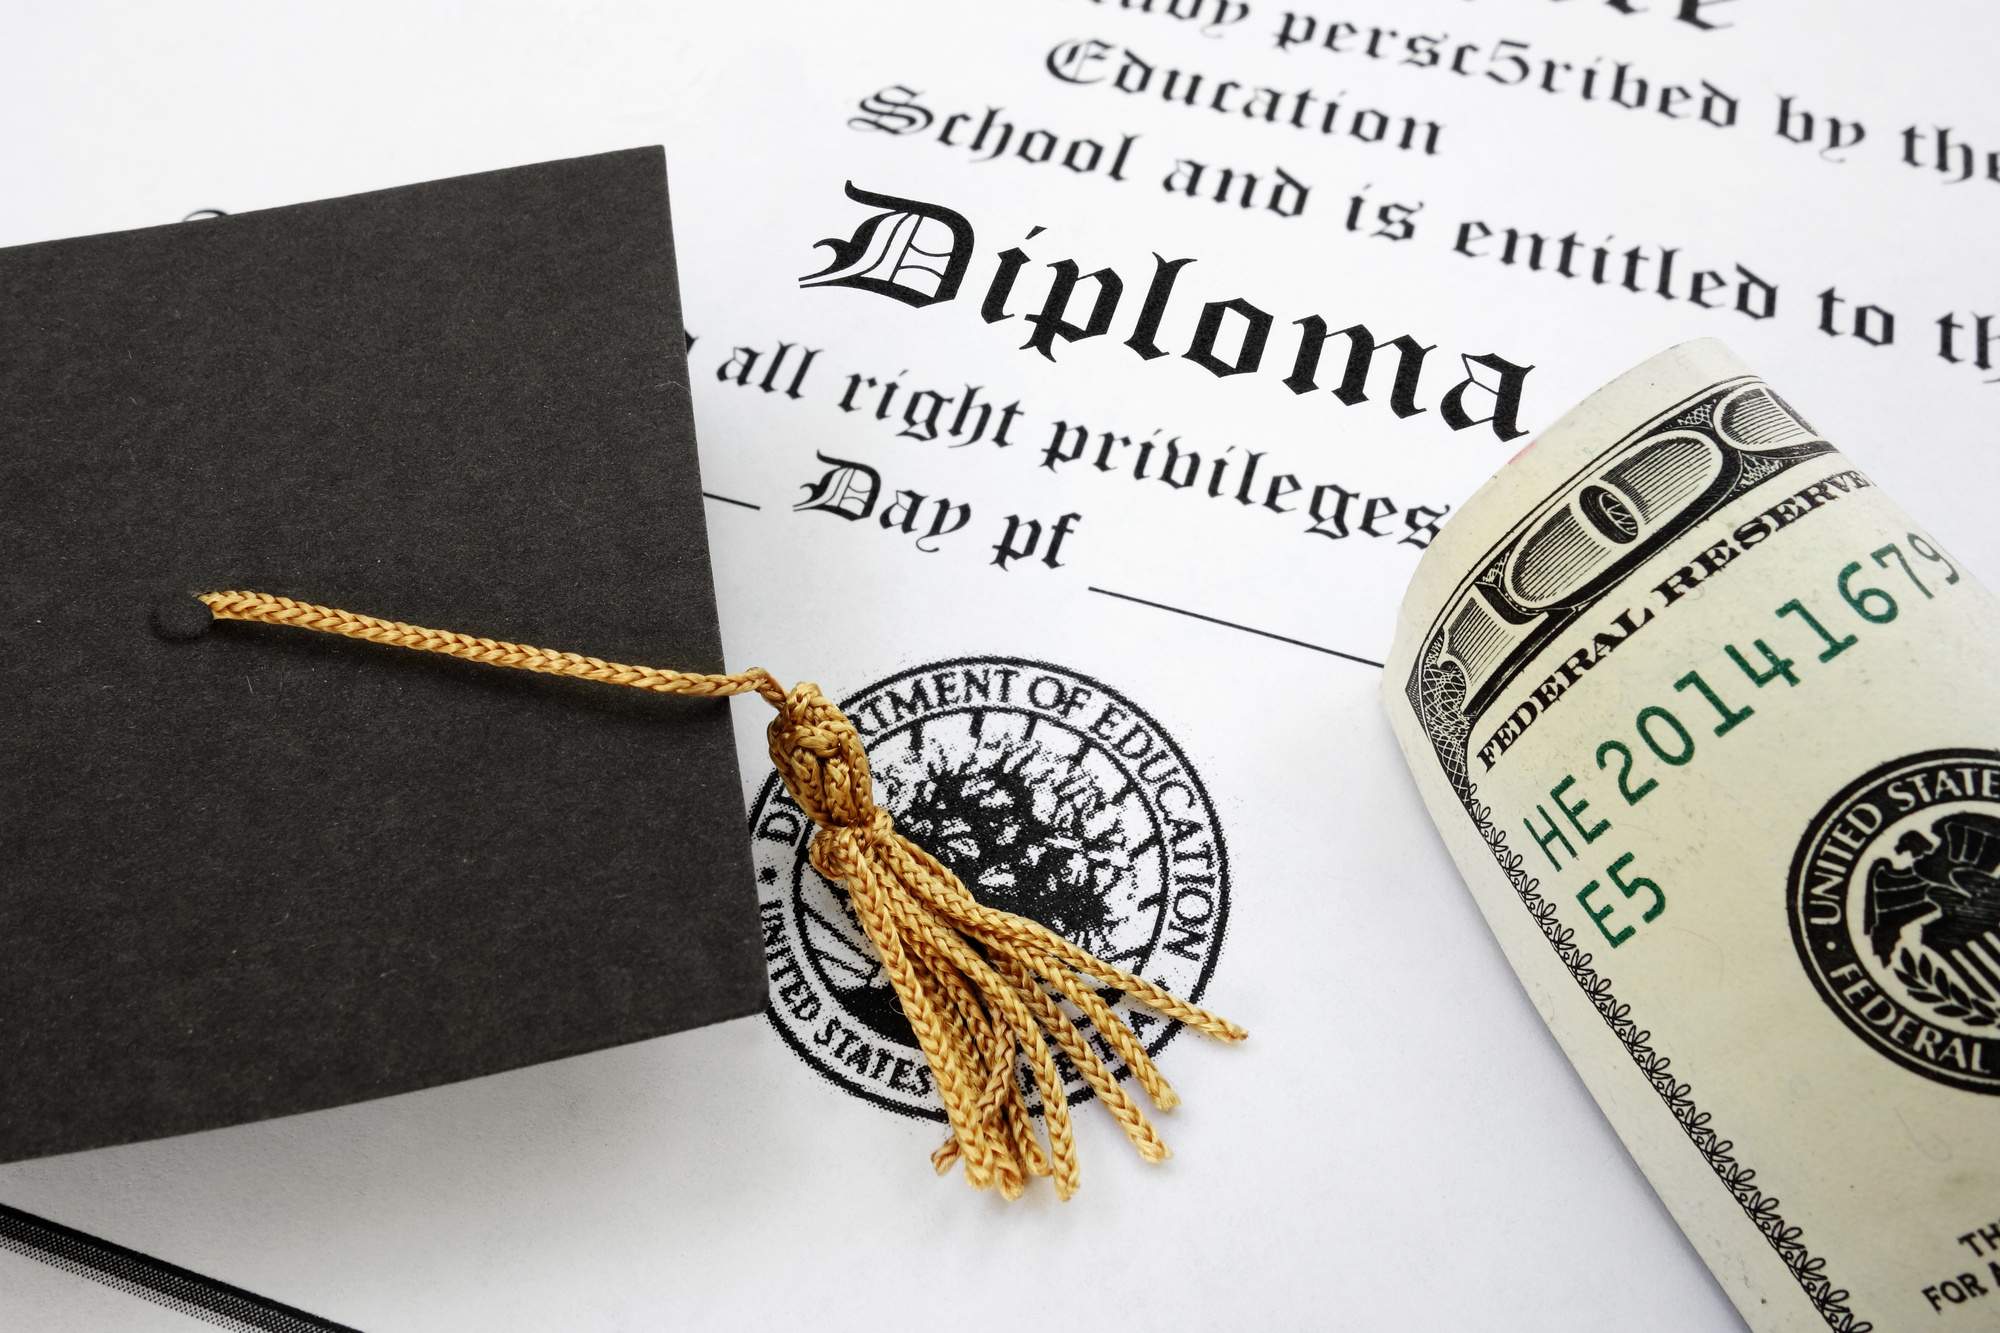 Lost or Damaged College Diploma? This Is What to Do